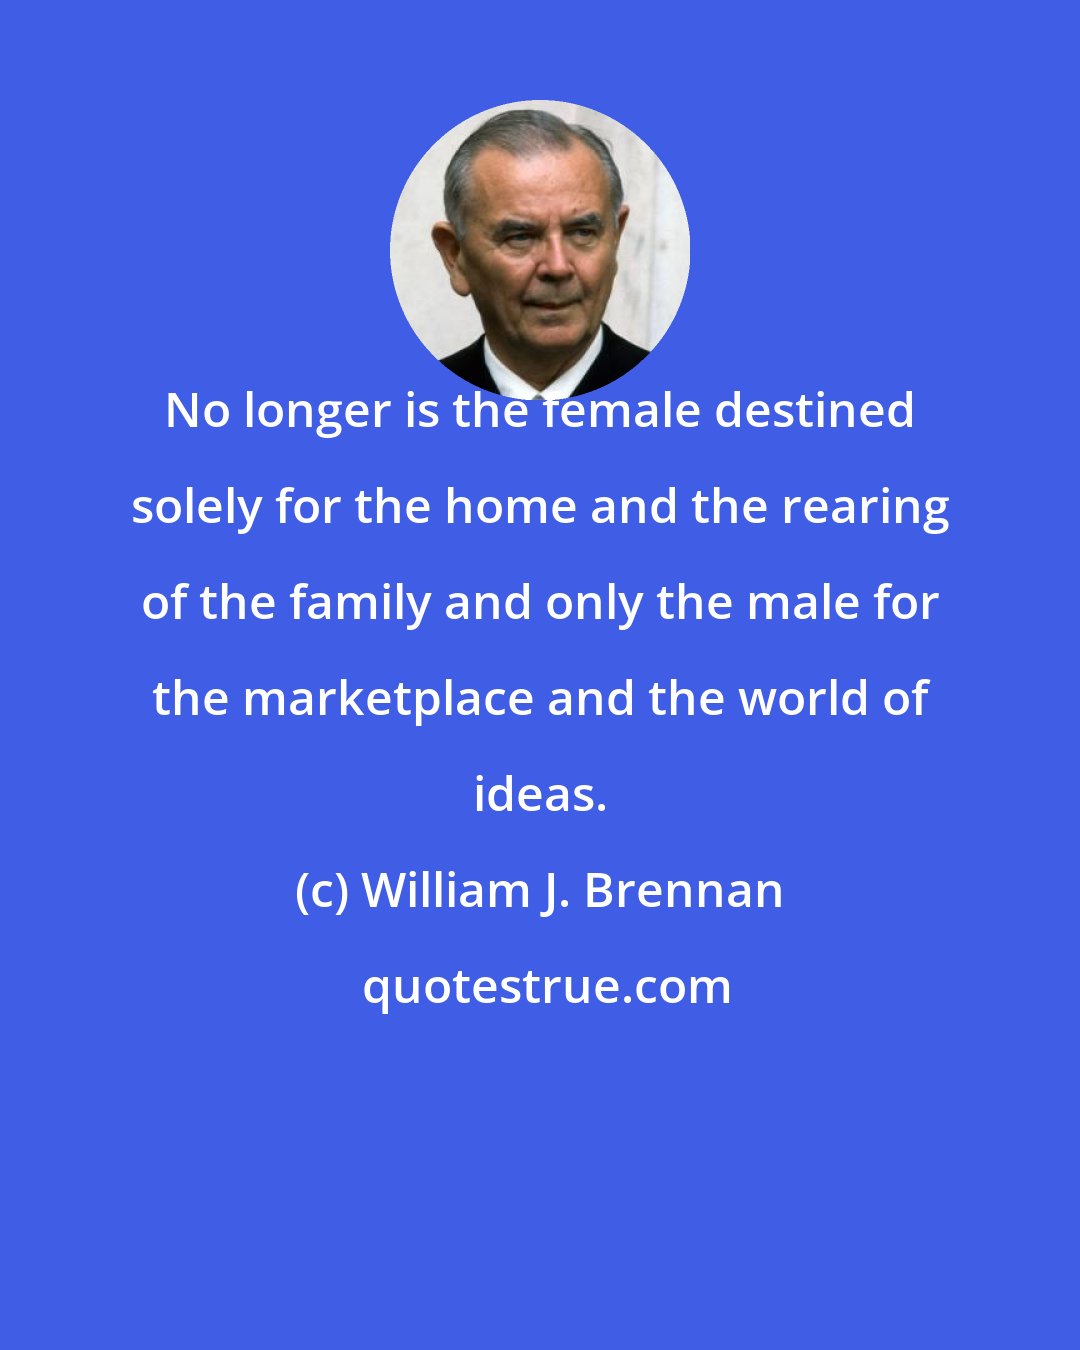 William J. Brennan: No longer is the female destined solely for the home and the rearing of the family and only the male for the marketplace and the world of ideas.